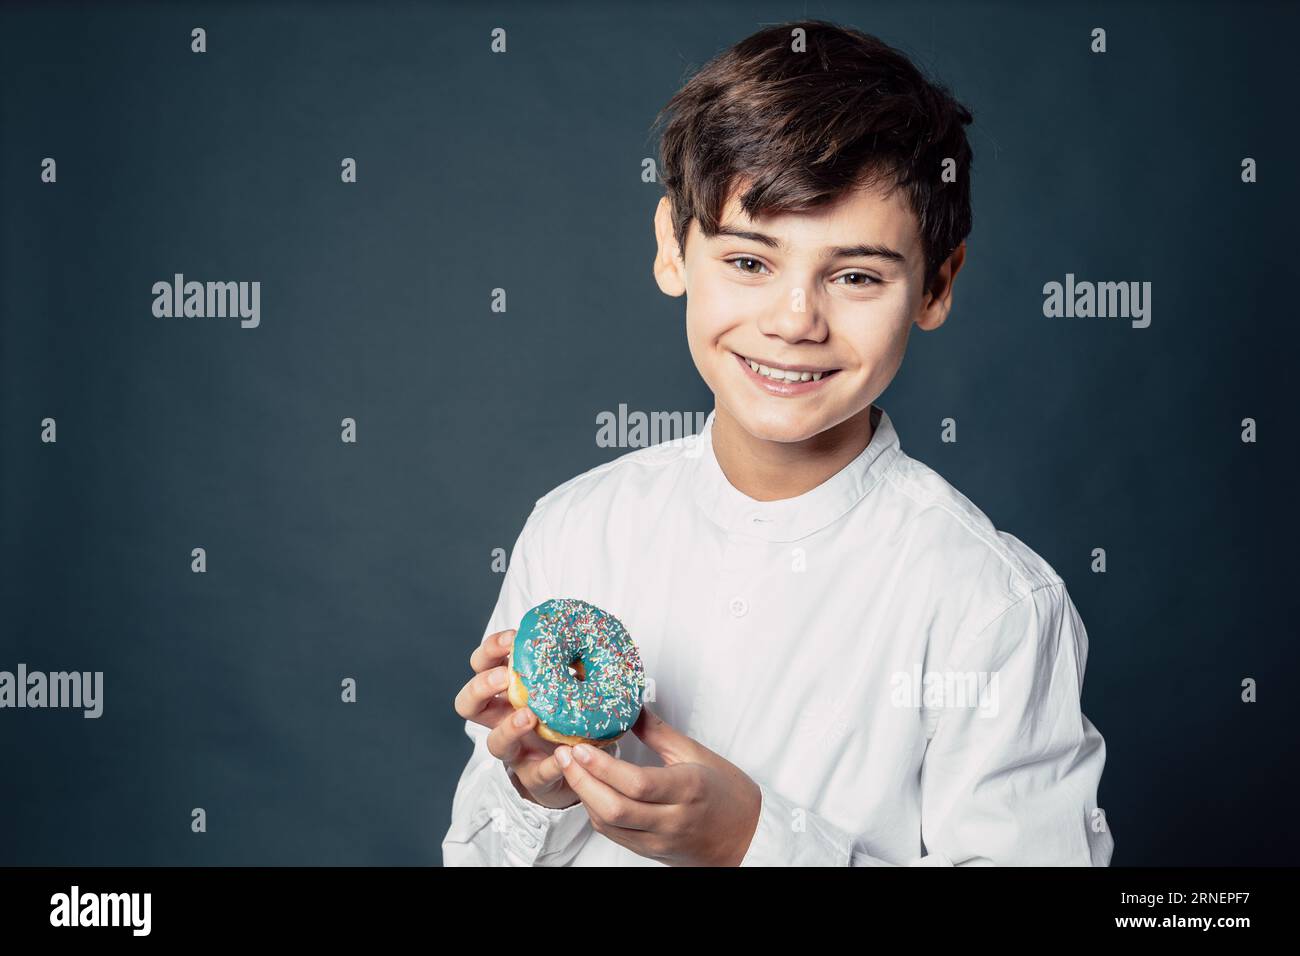 teen boy present donut for camera and is happy about sugar snack that makes his childhood joyful and sweet Stock Photo